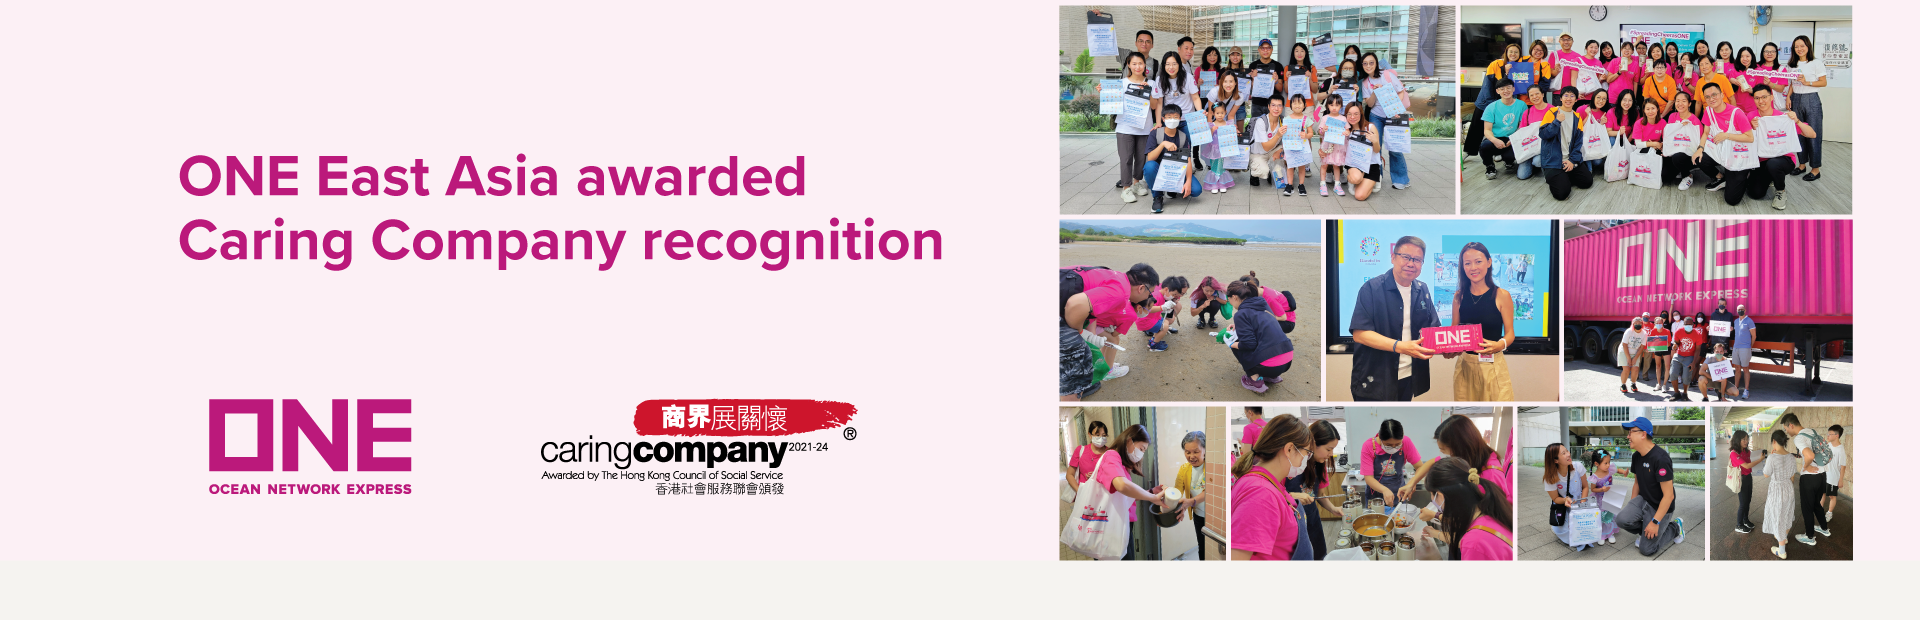 ONE East Asia awarded Caring Company recognition